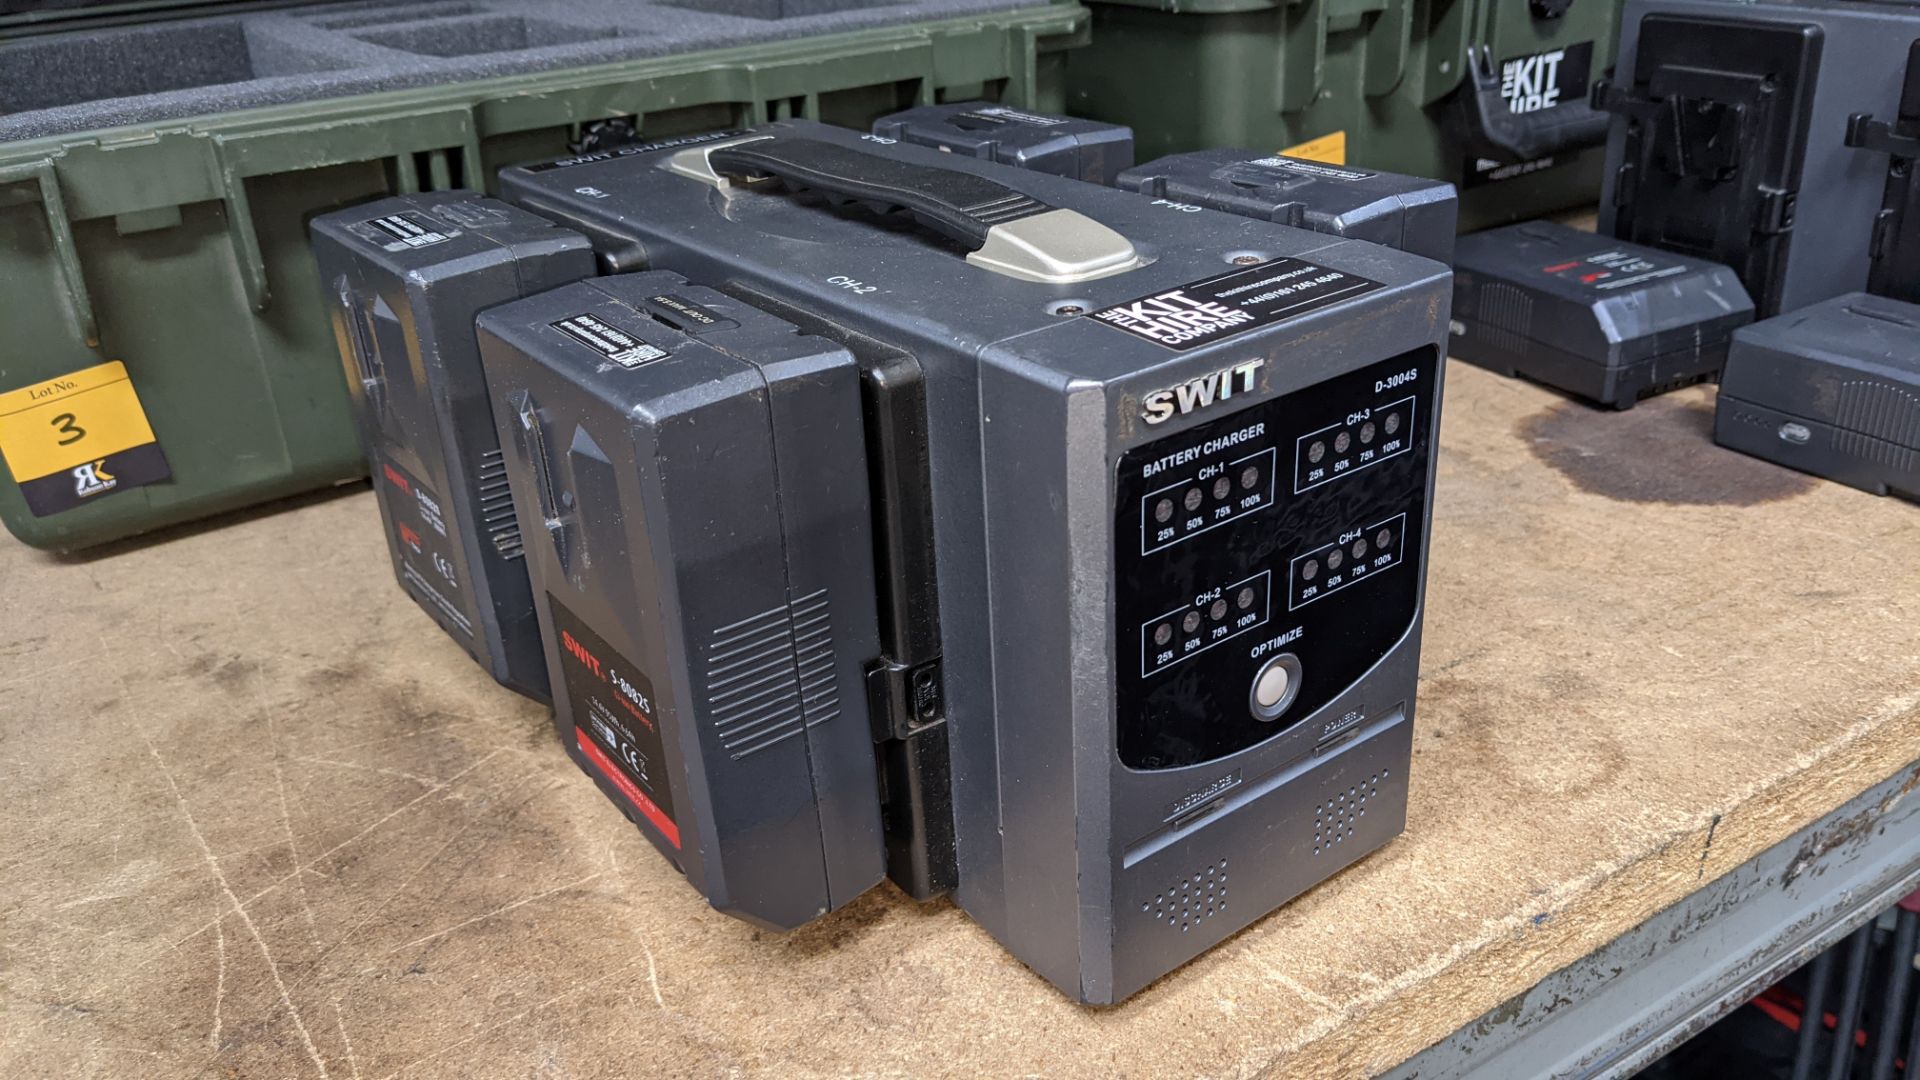 SWIT battery & charging system consisting of model D-3004S 4-bay charger & 4 off model S-8082S batte - Image 3 of 14